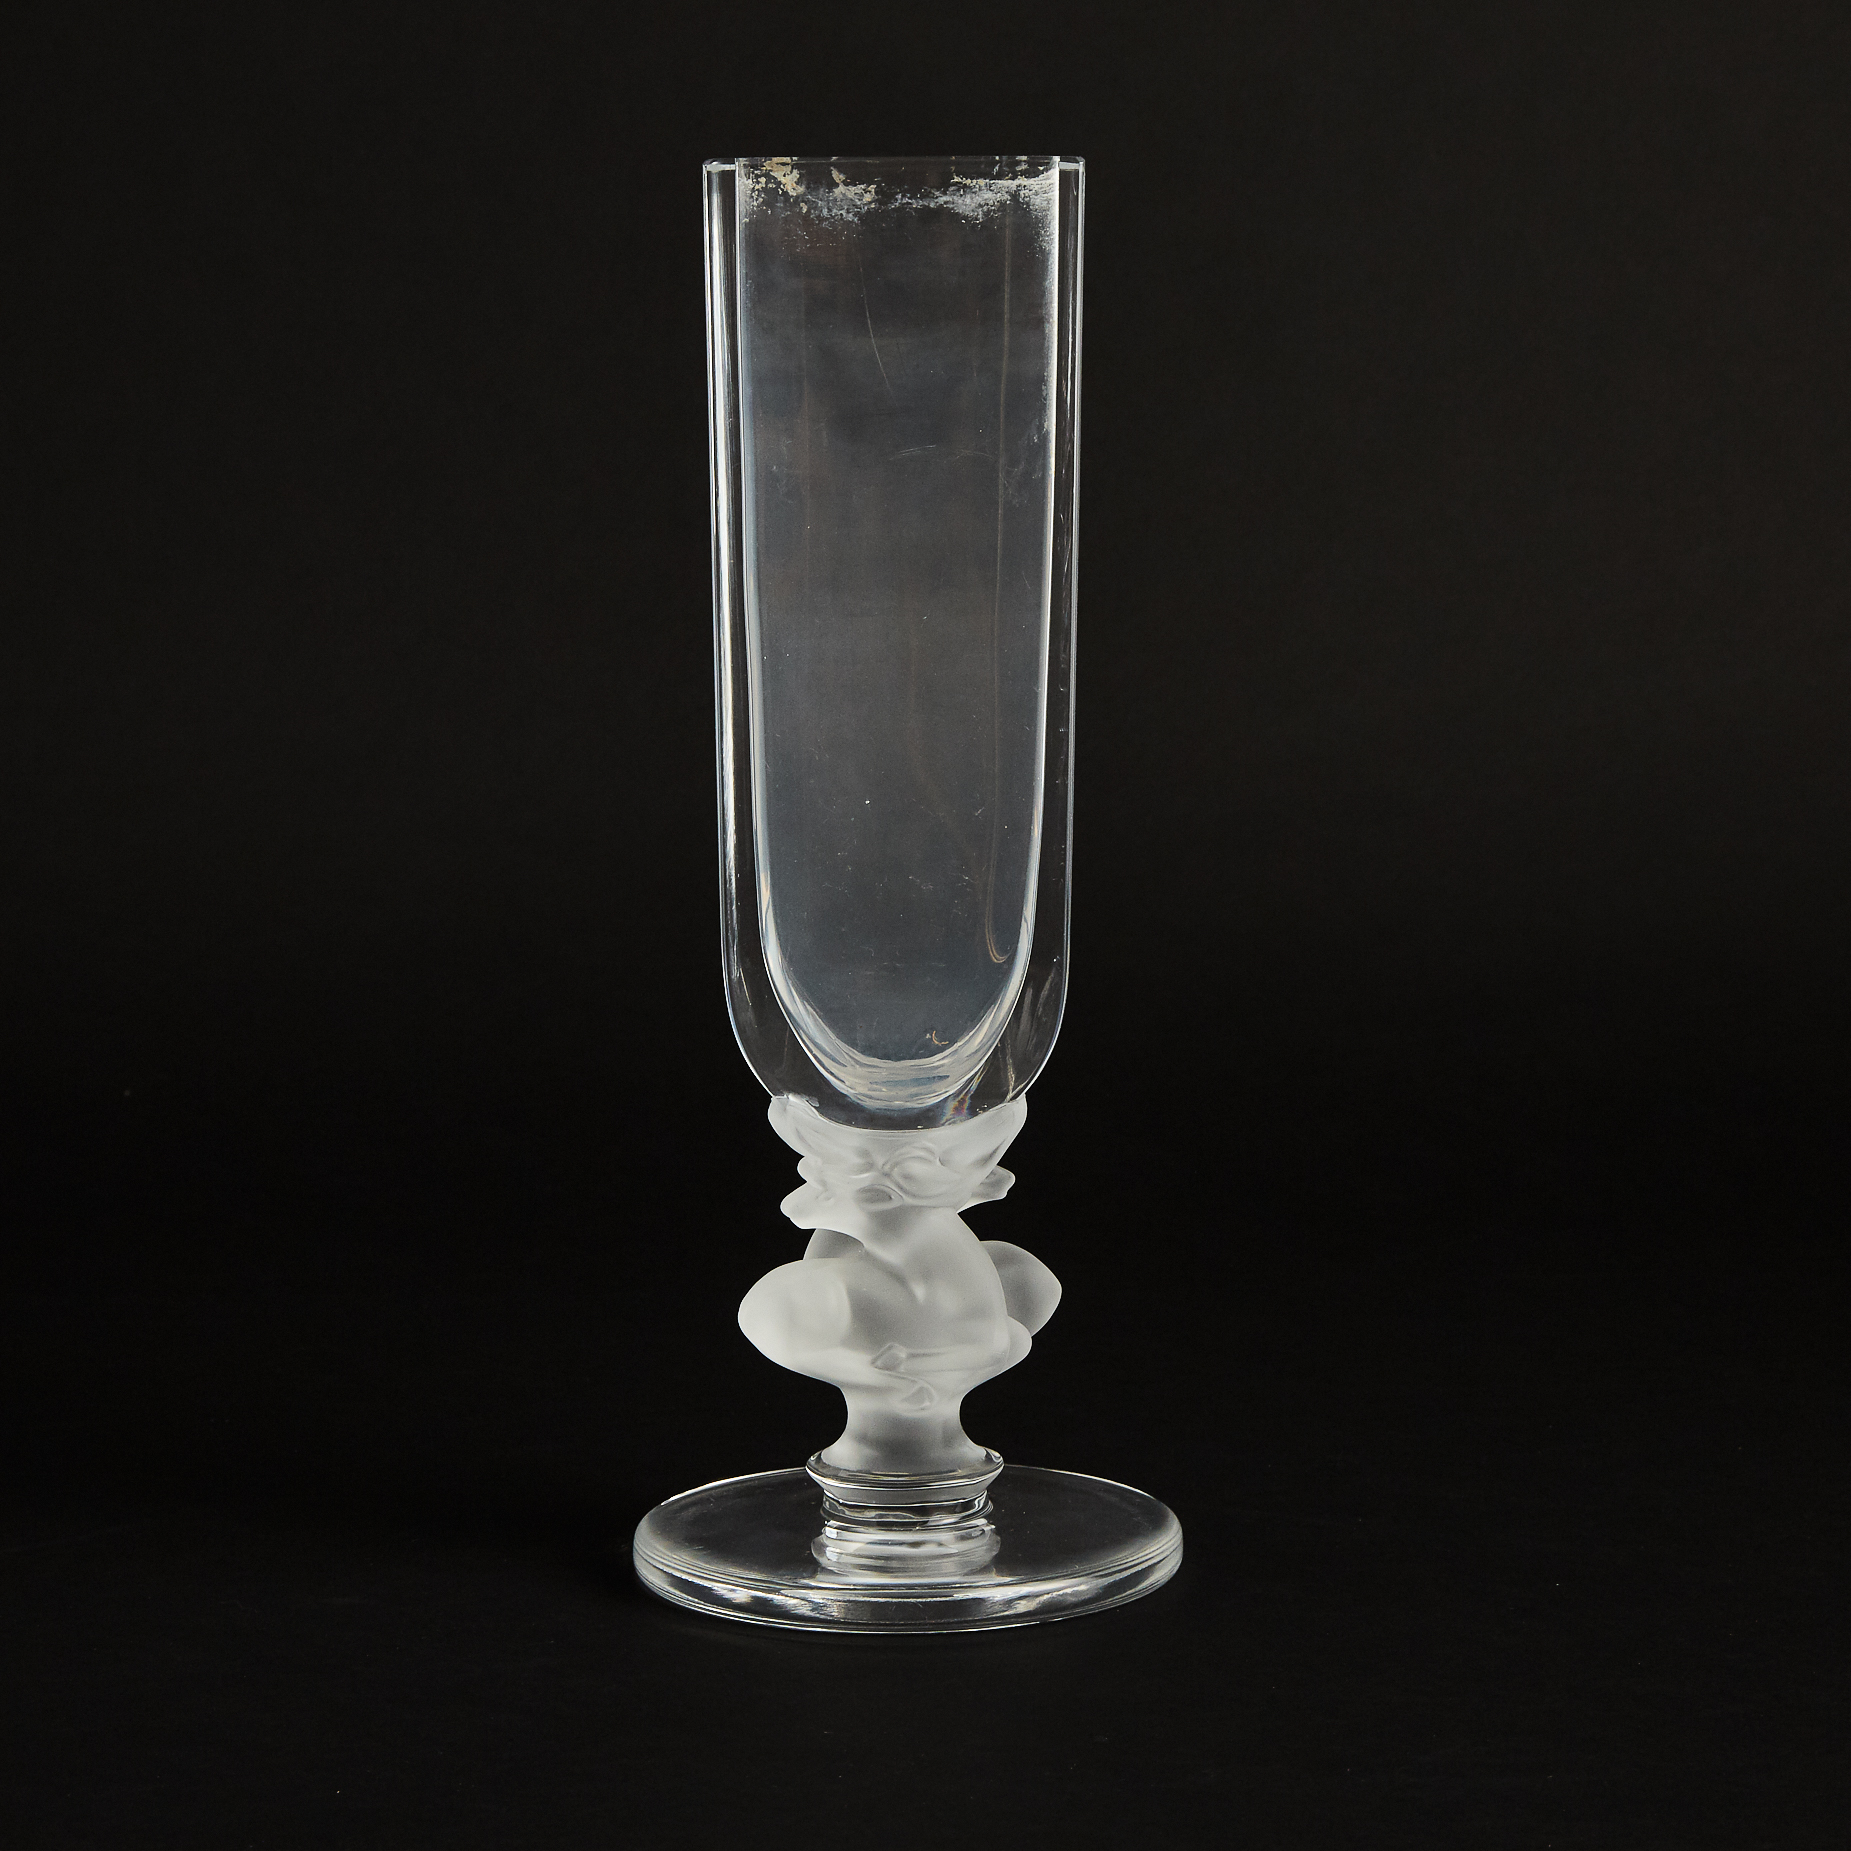 Lalique Moulded and Partly Frosted Glass Vase, post-1945